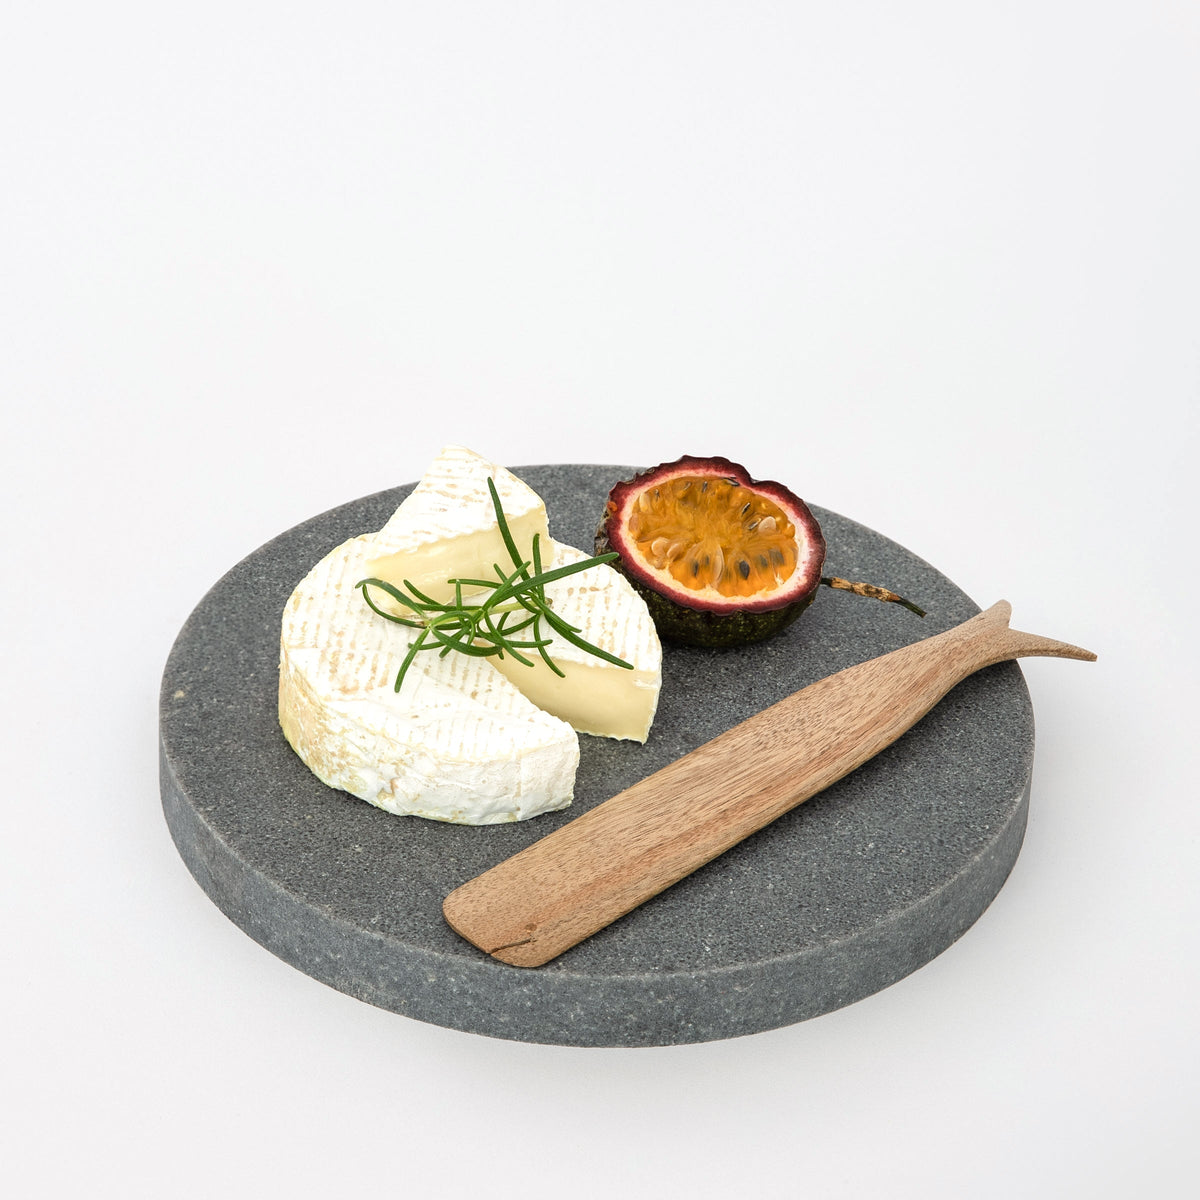 Quartz round and small serving platter in Rugged Concrete by Aureliia Collection. A round marble tray in appearance, the Small Quartz Round Serving Platter is more durable than marble and makes the perfect dessert platter, small cheese board or decorative tray. An excellent home decor gift for someone who has it all.